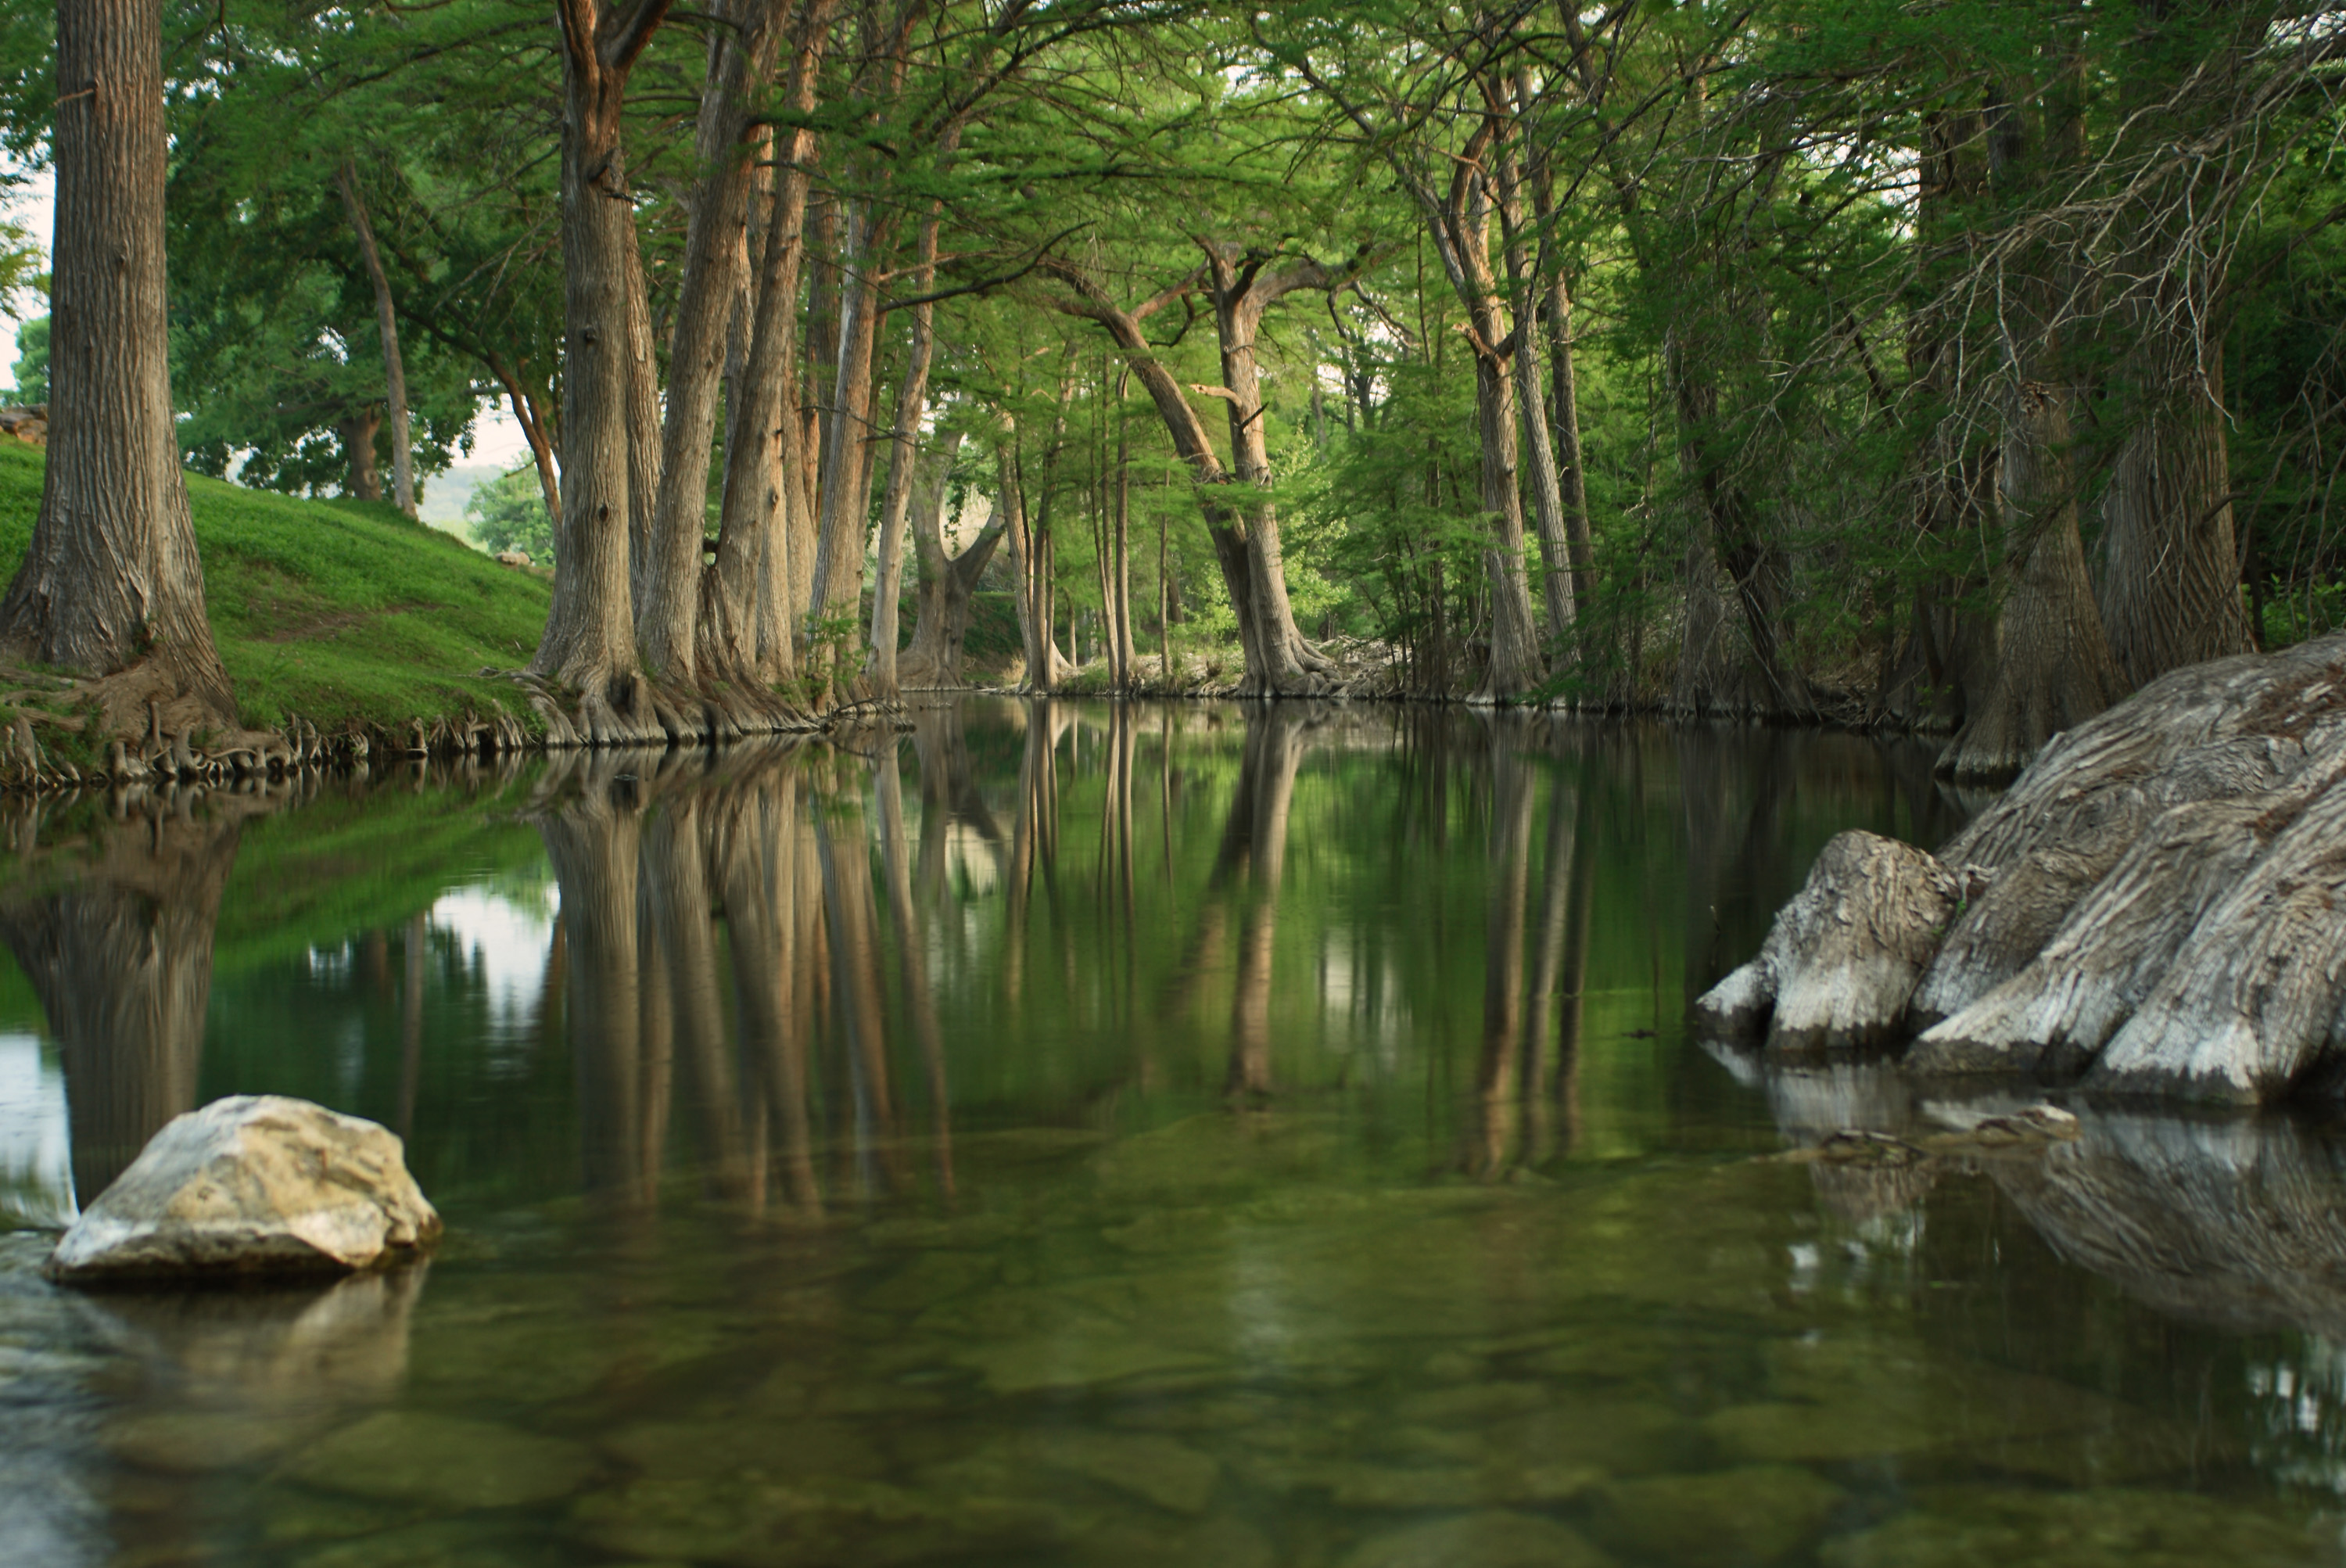 Texas Water Symposium planned for February 23 in San Marcos: Watershed Protection Plans: Creating and Maintaining Healthy Waterways at a Community Scale